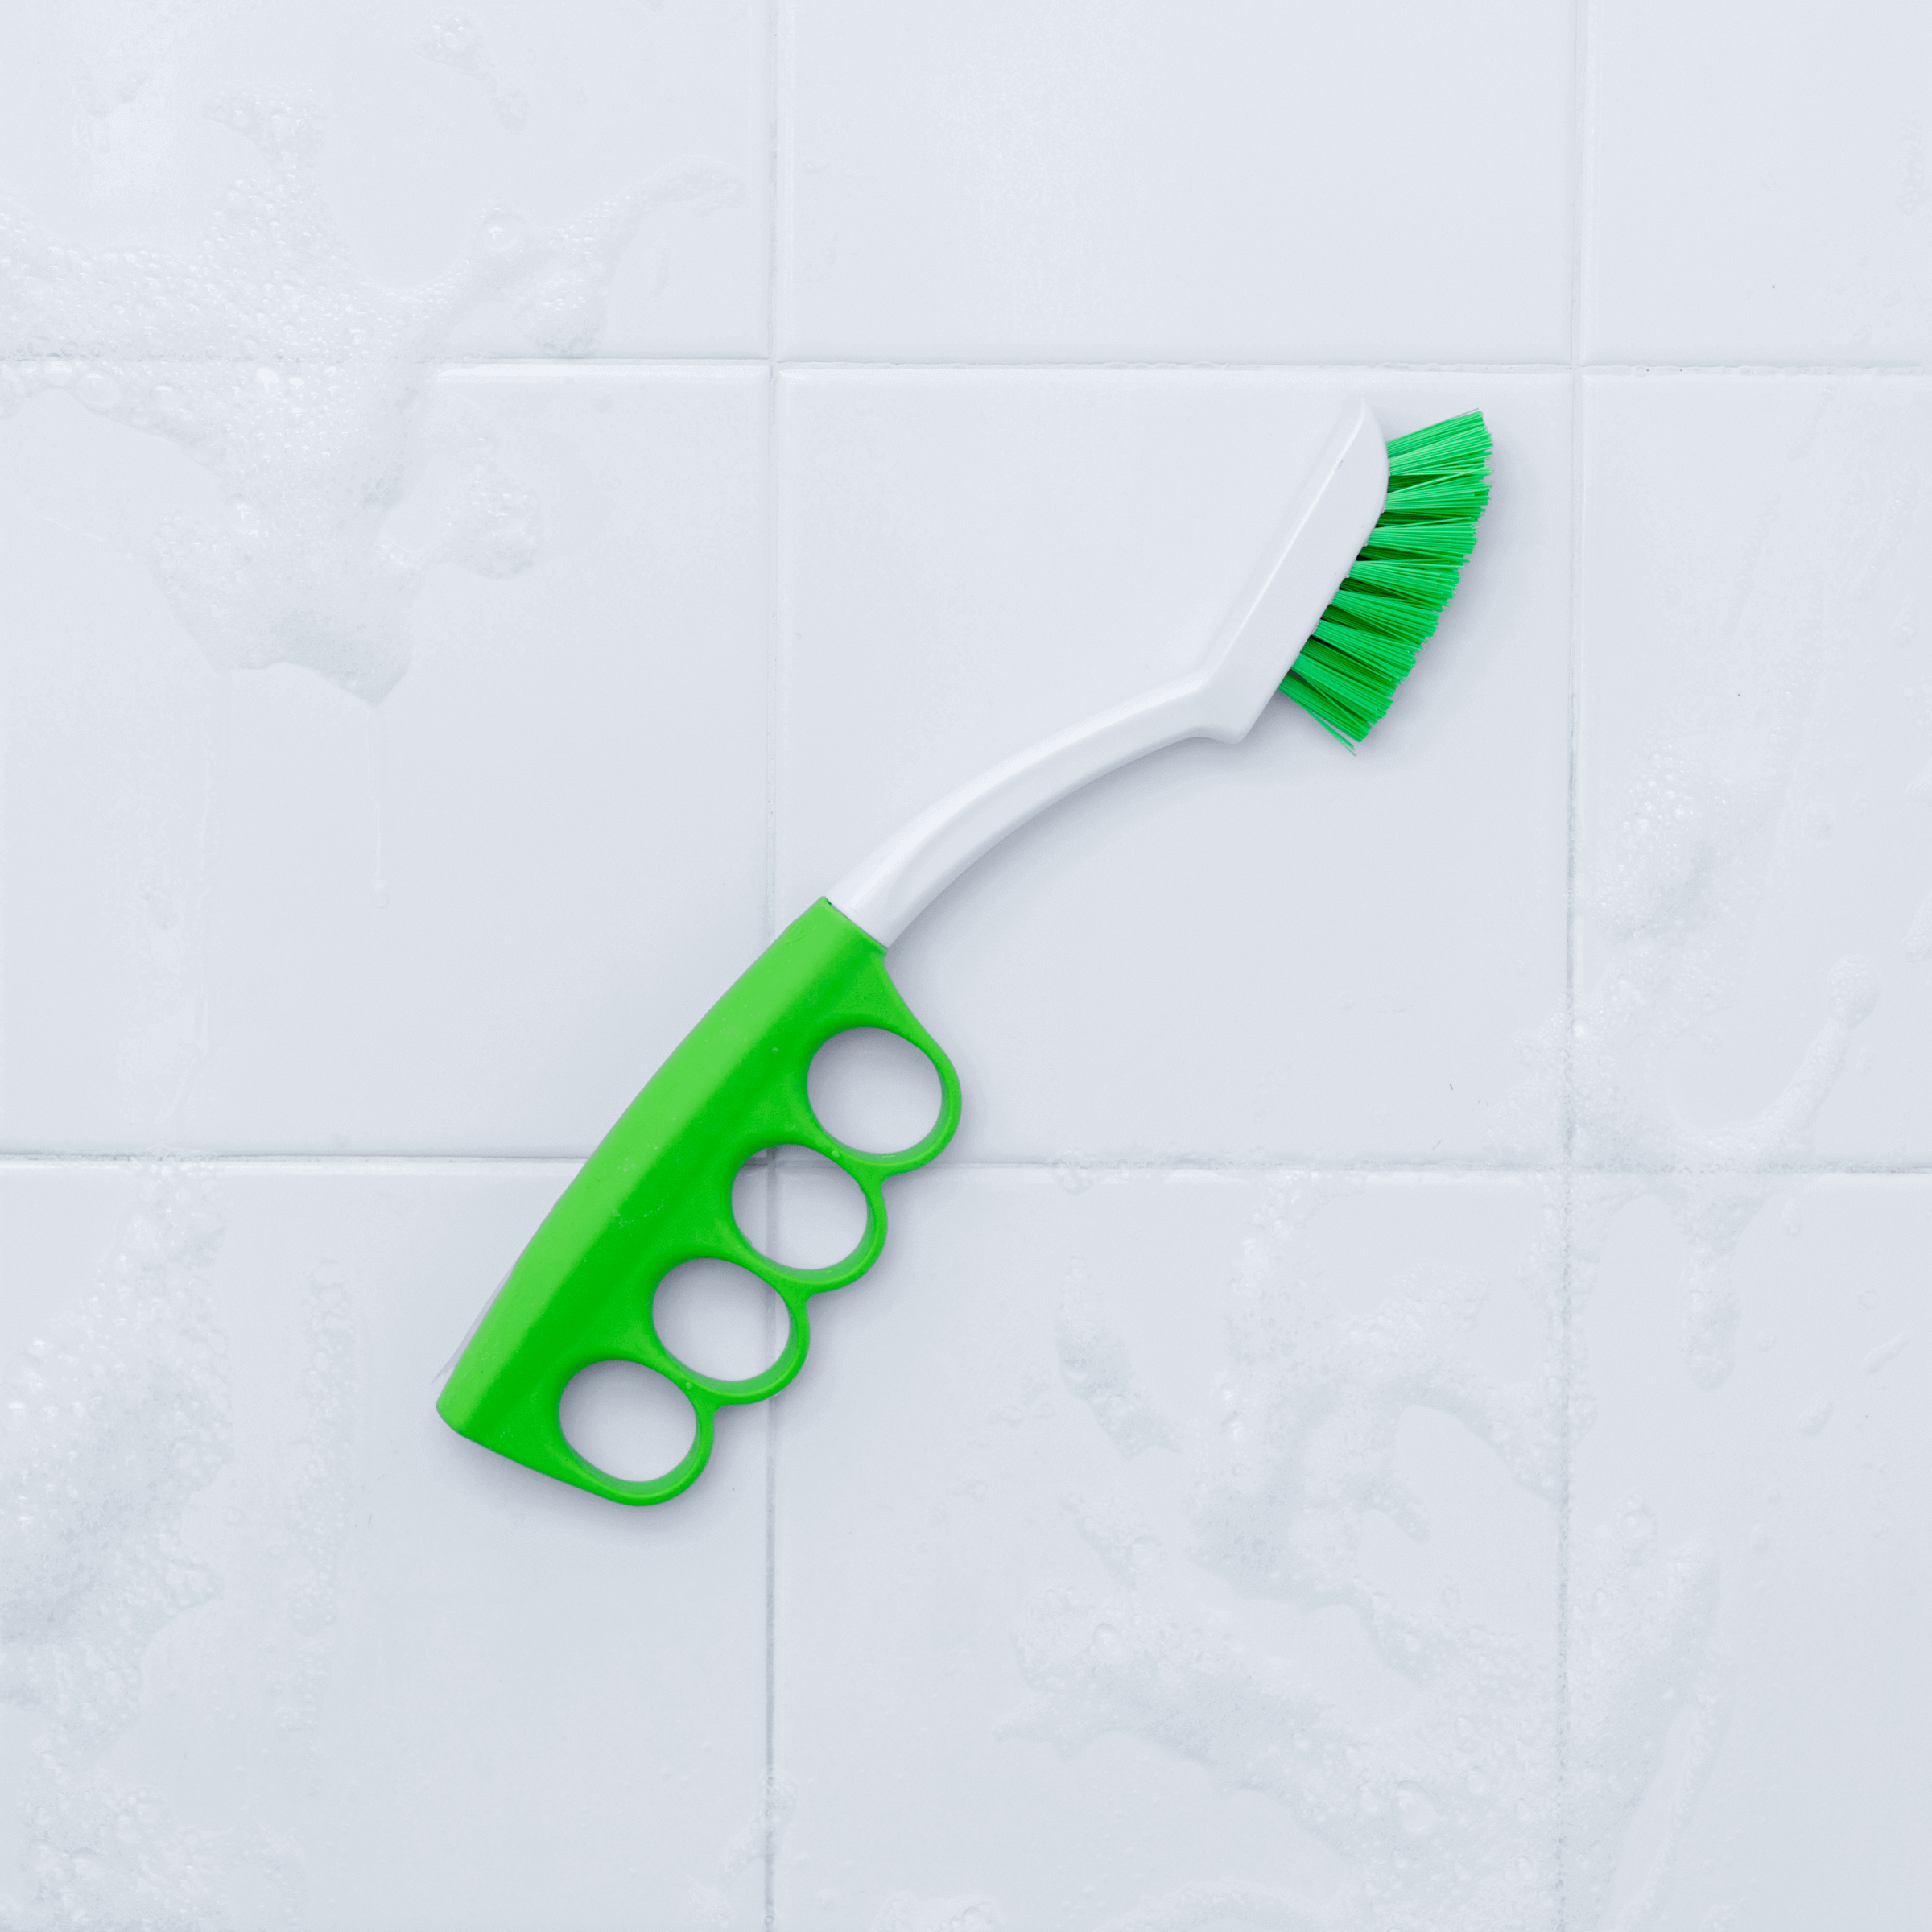 Scrub, Scrub and Scrub some more with a Tile Grout Brush!